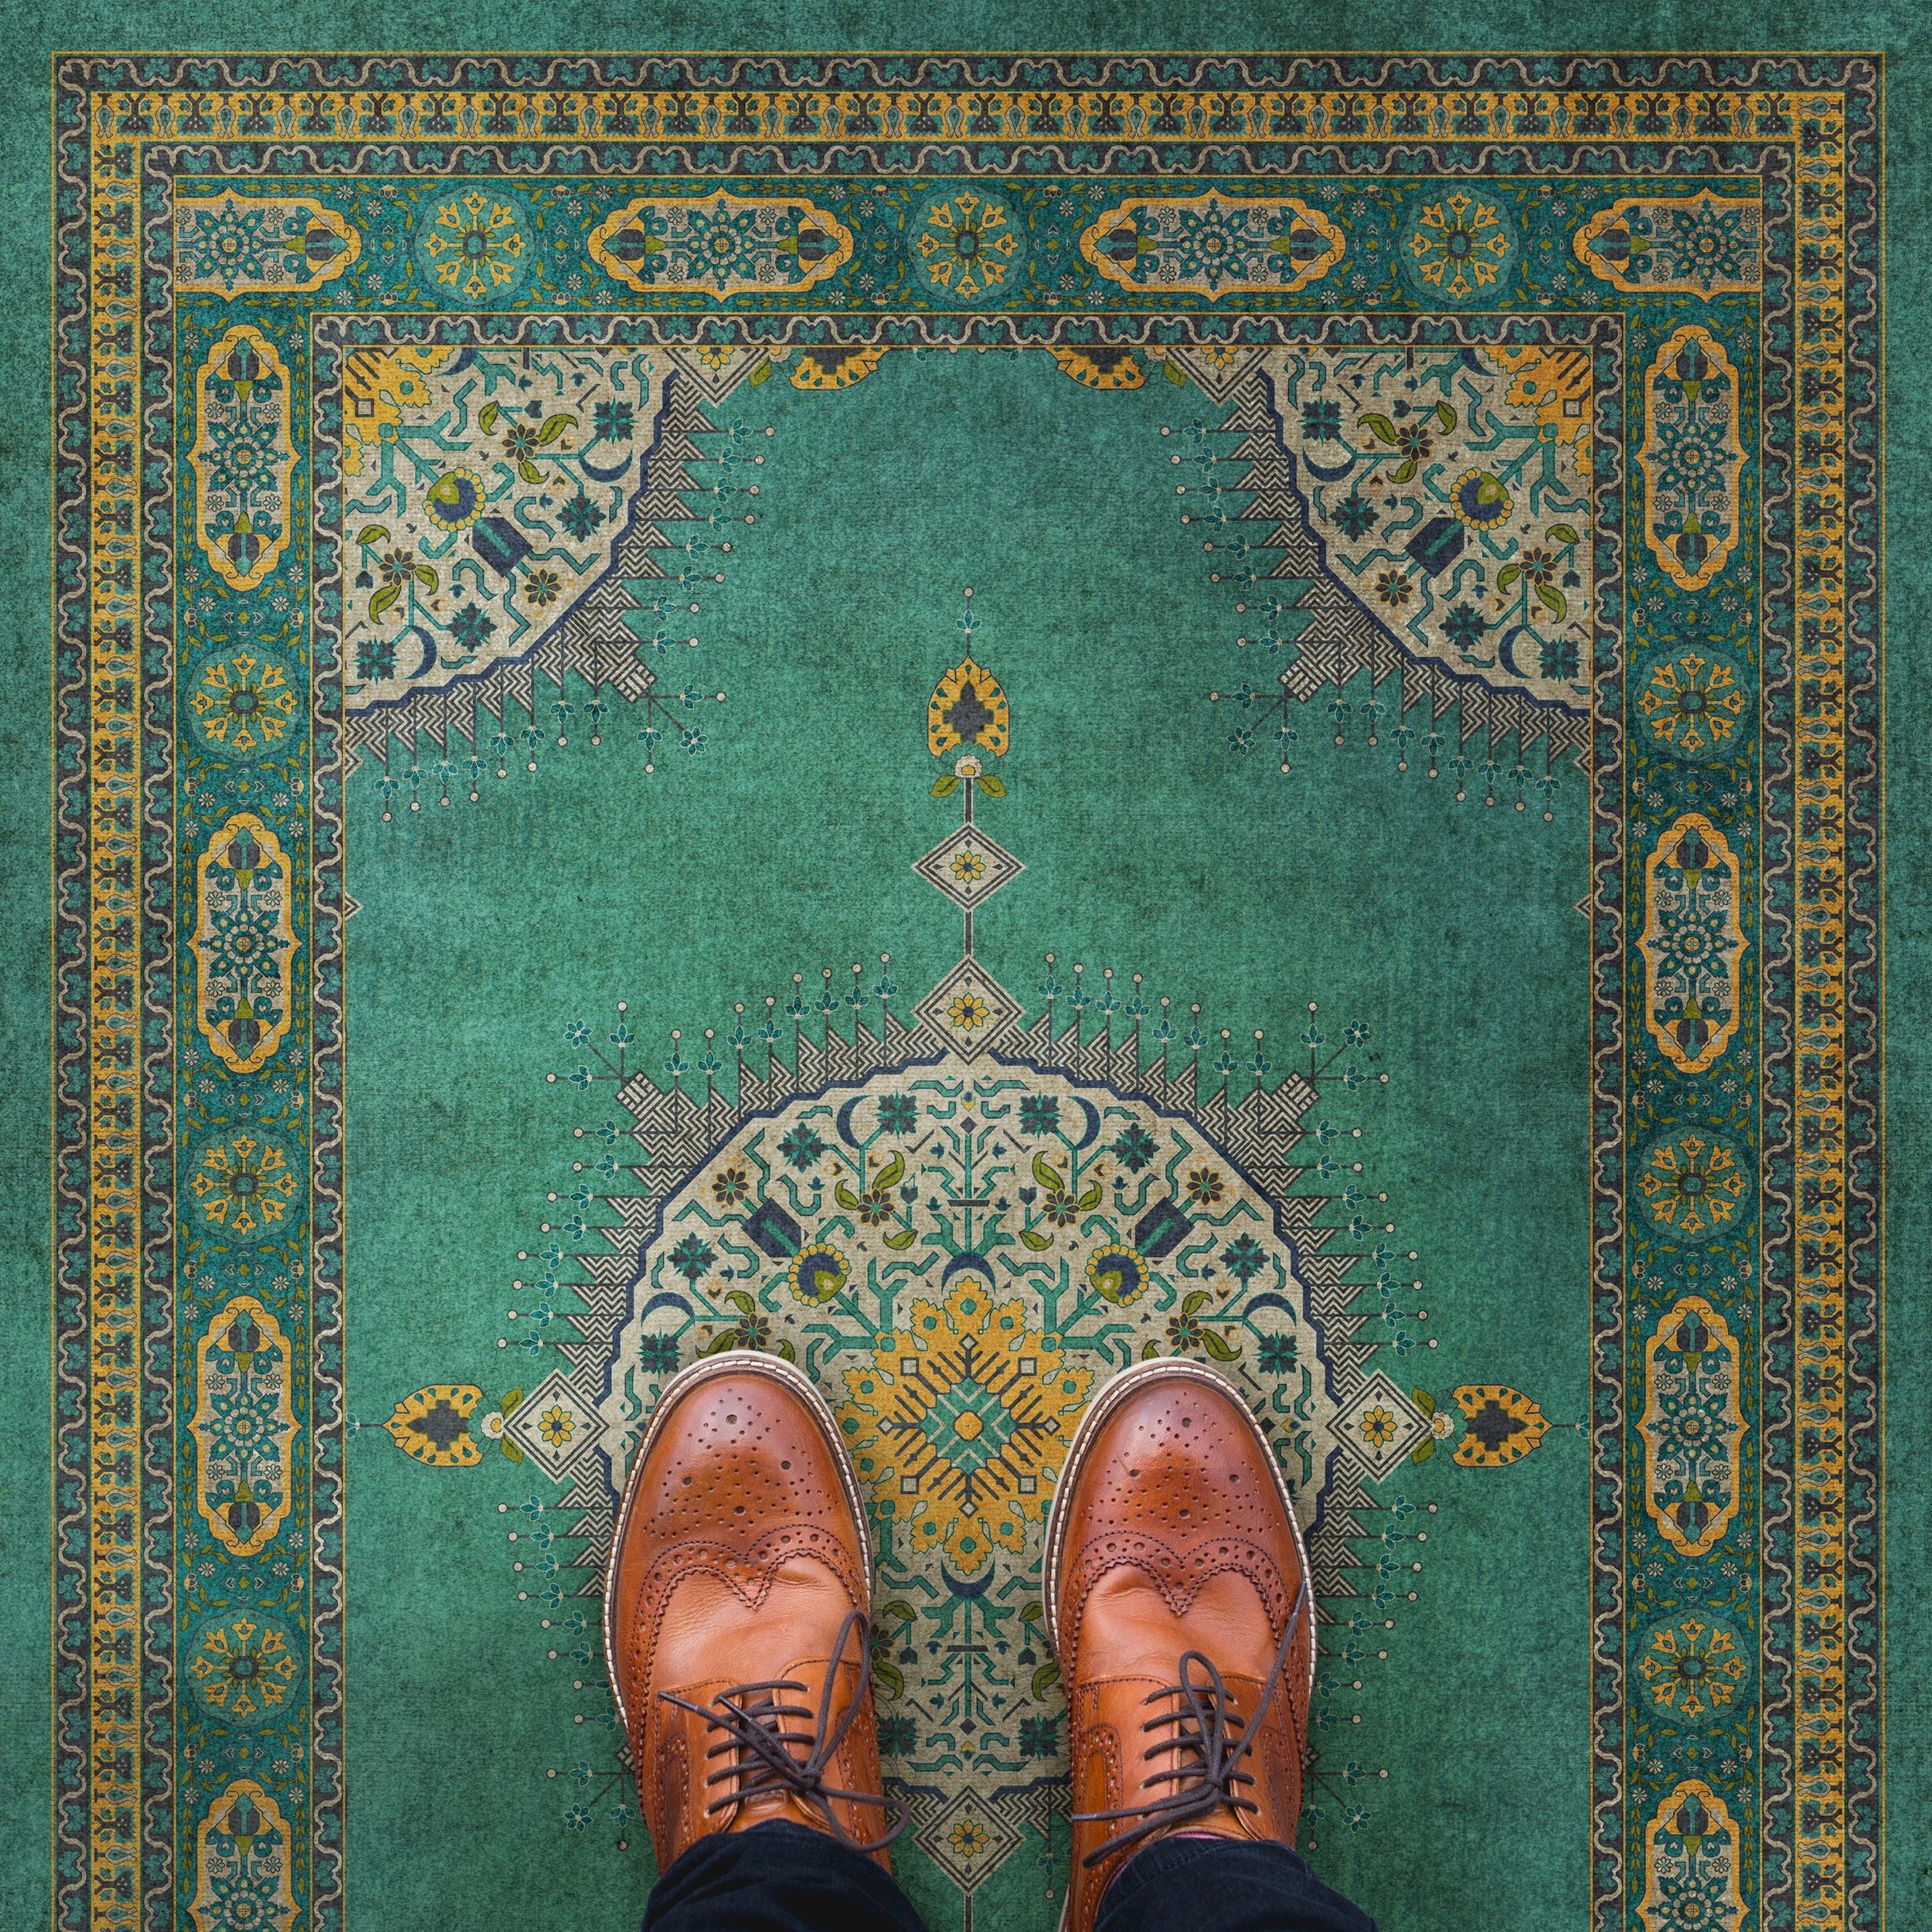 Persian Carpet; All you need to know + pic & texture - EavarTravel